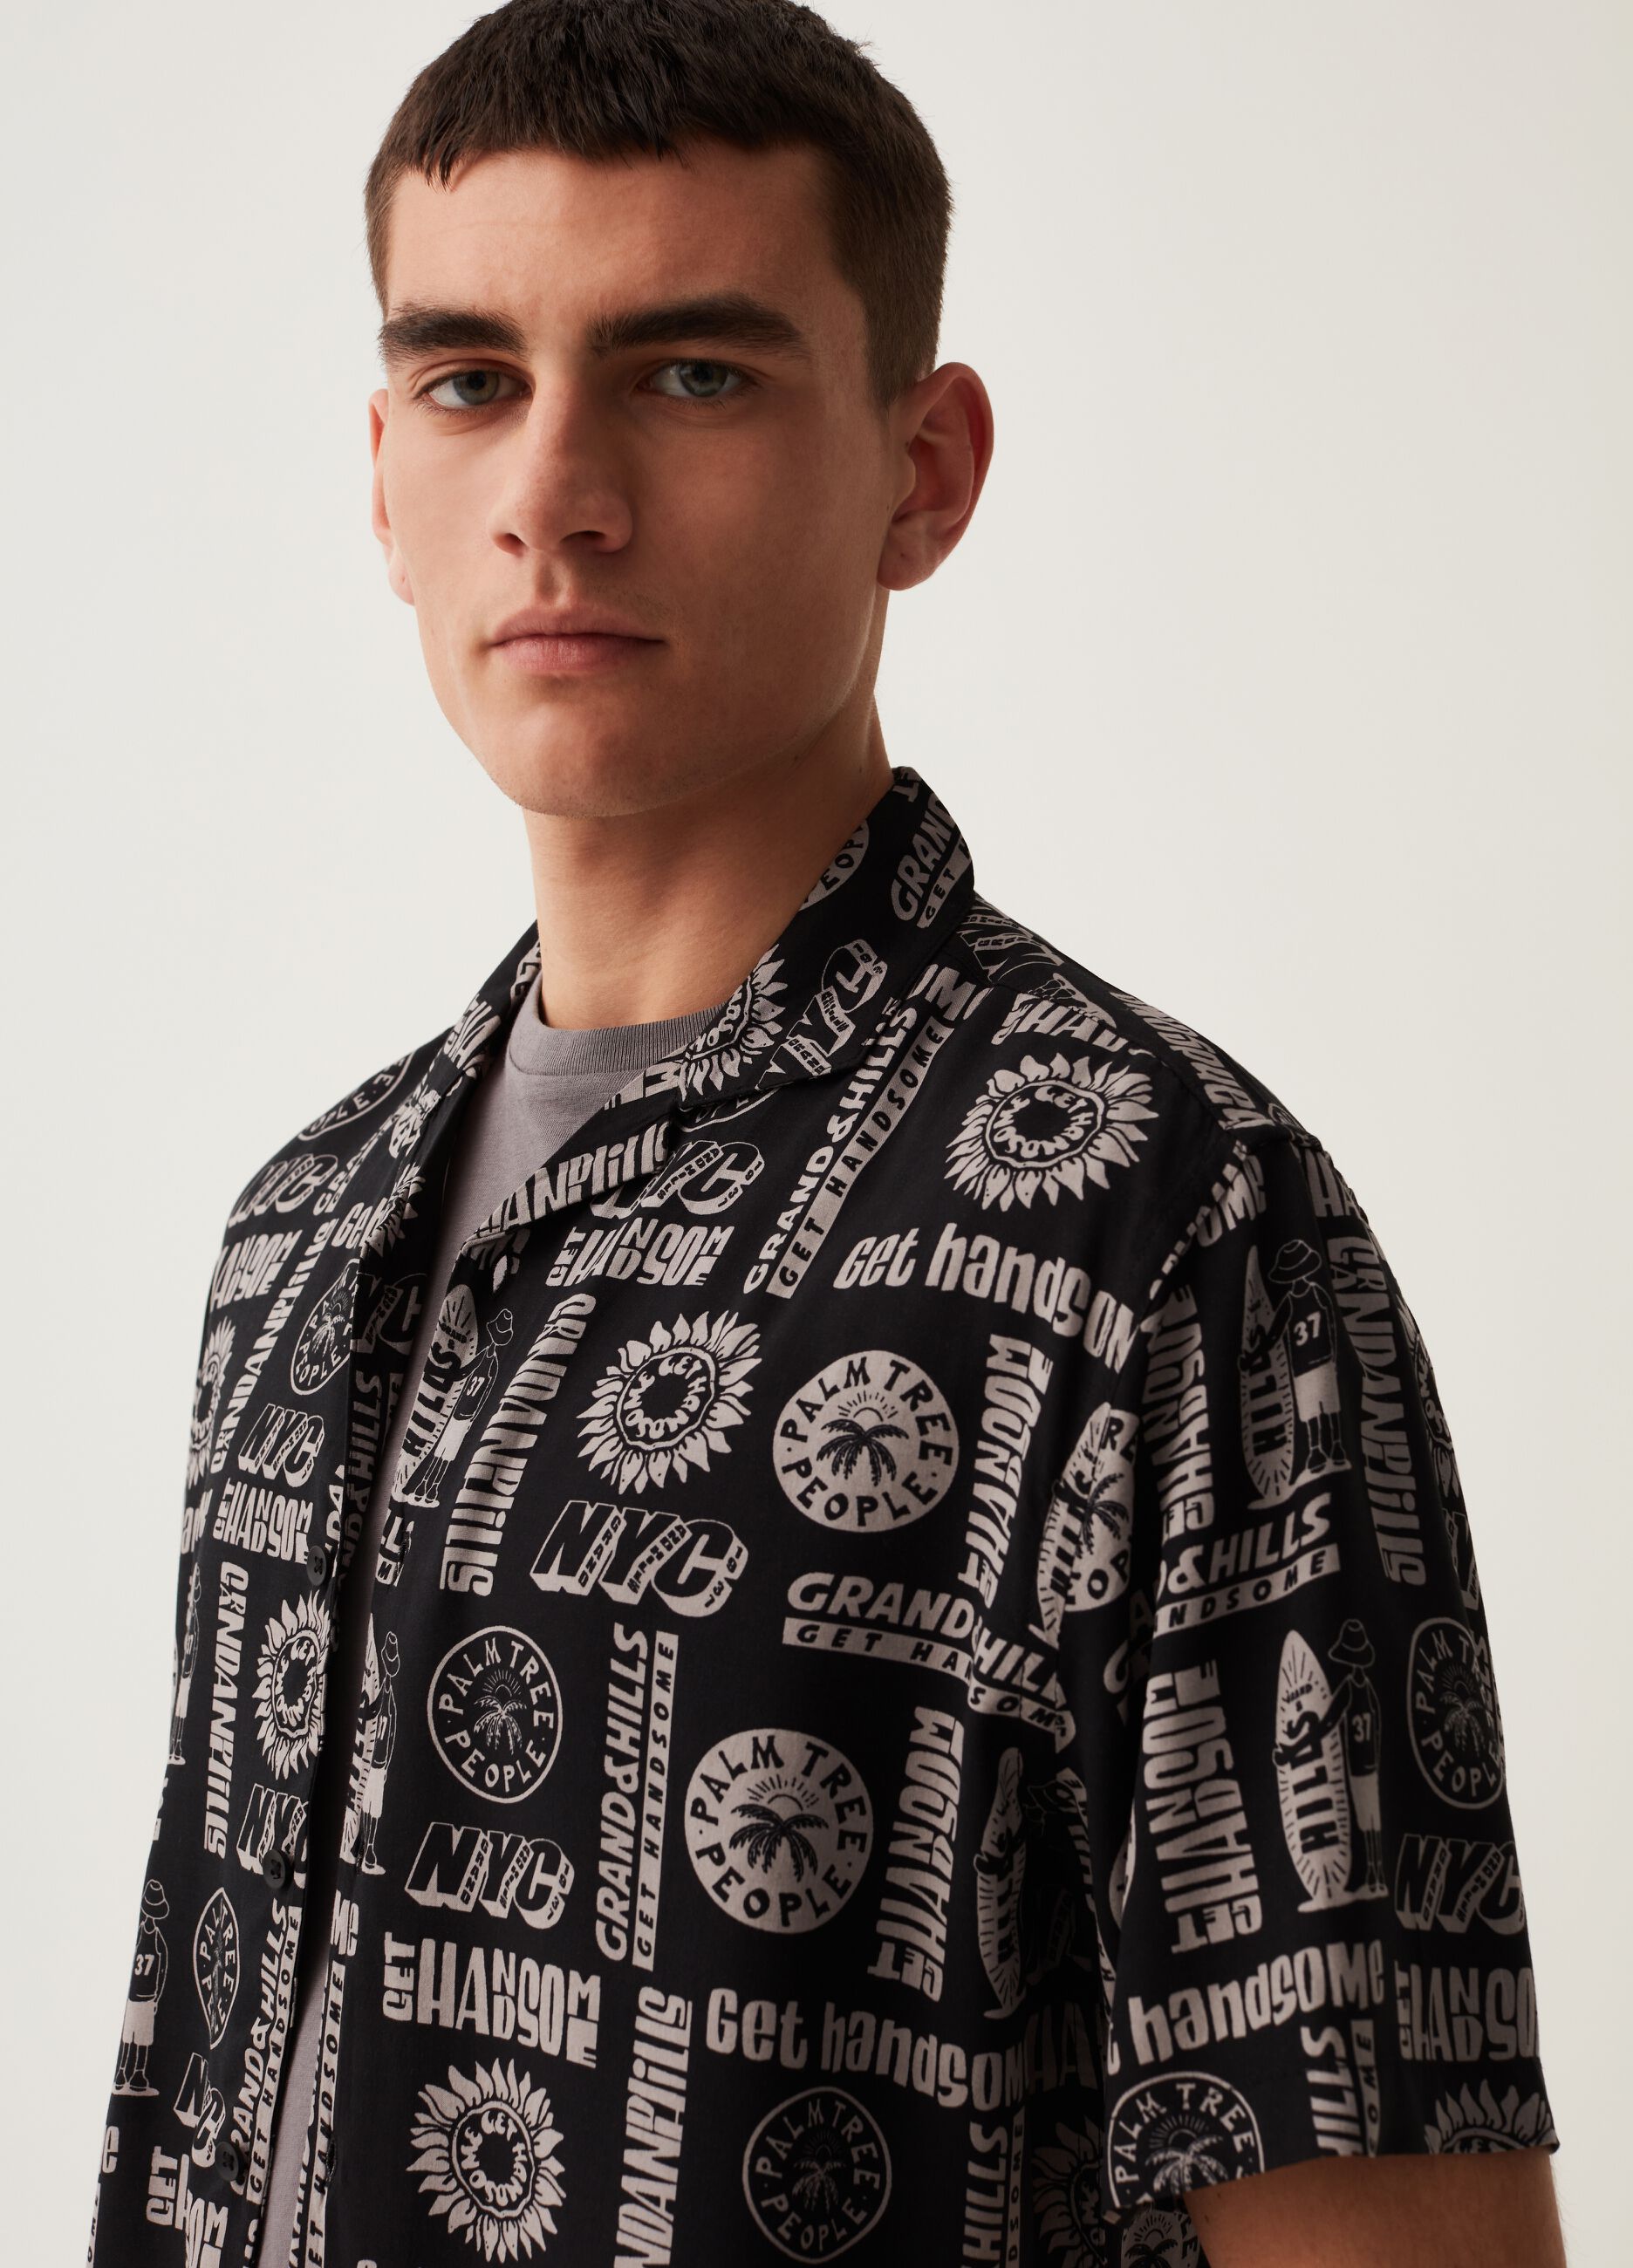 Grand&Hills oversize shirt in sustainable viscose.